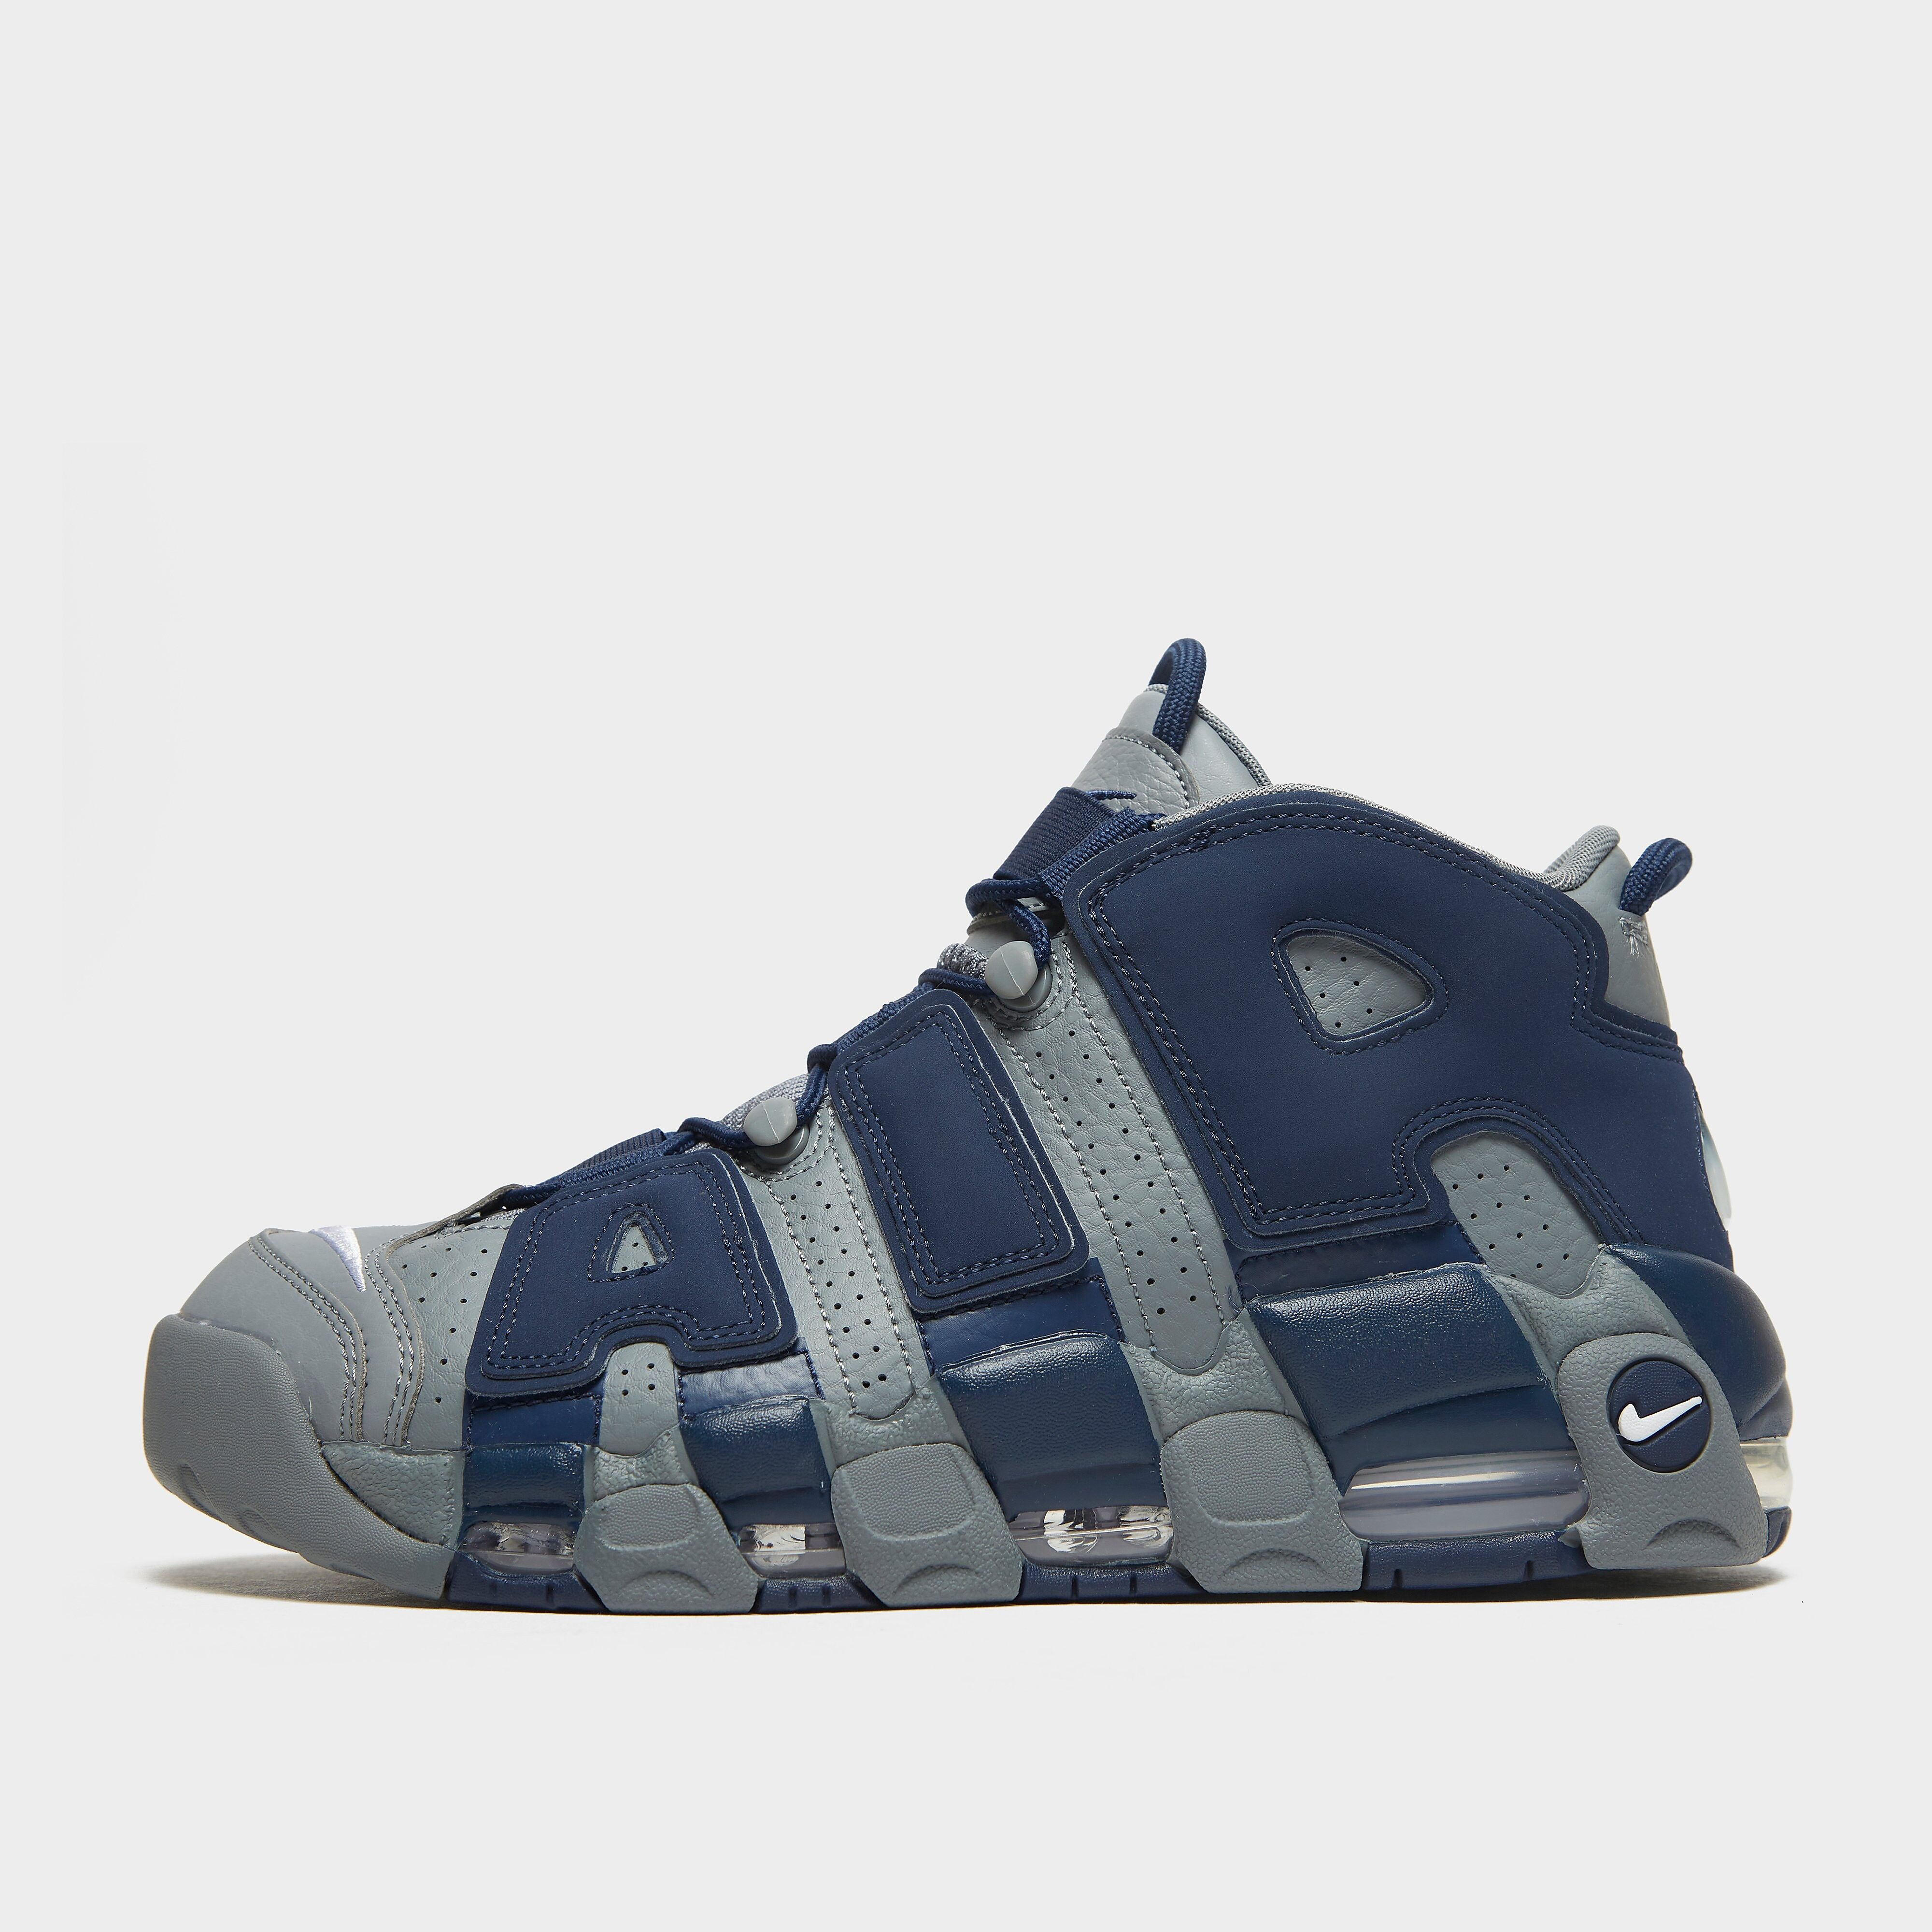 Nike Air Uptempo 96 Gry/nvy - Grey/Navy - Mens  size: 13